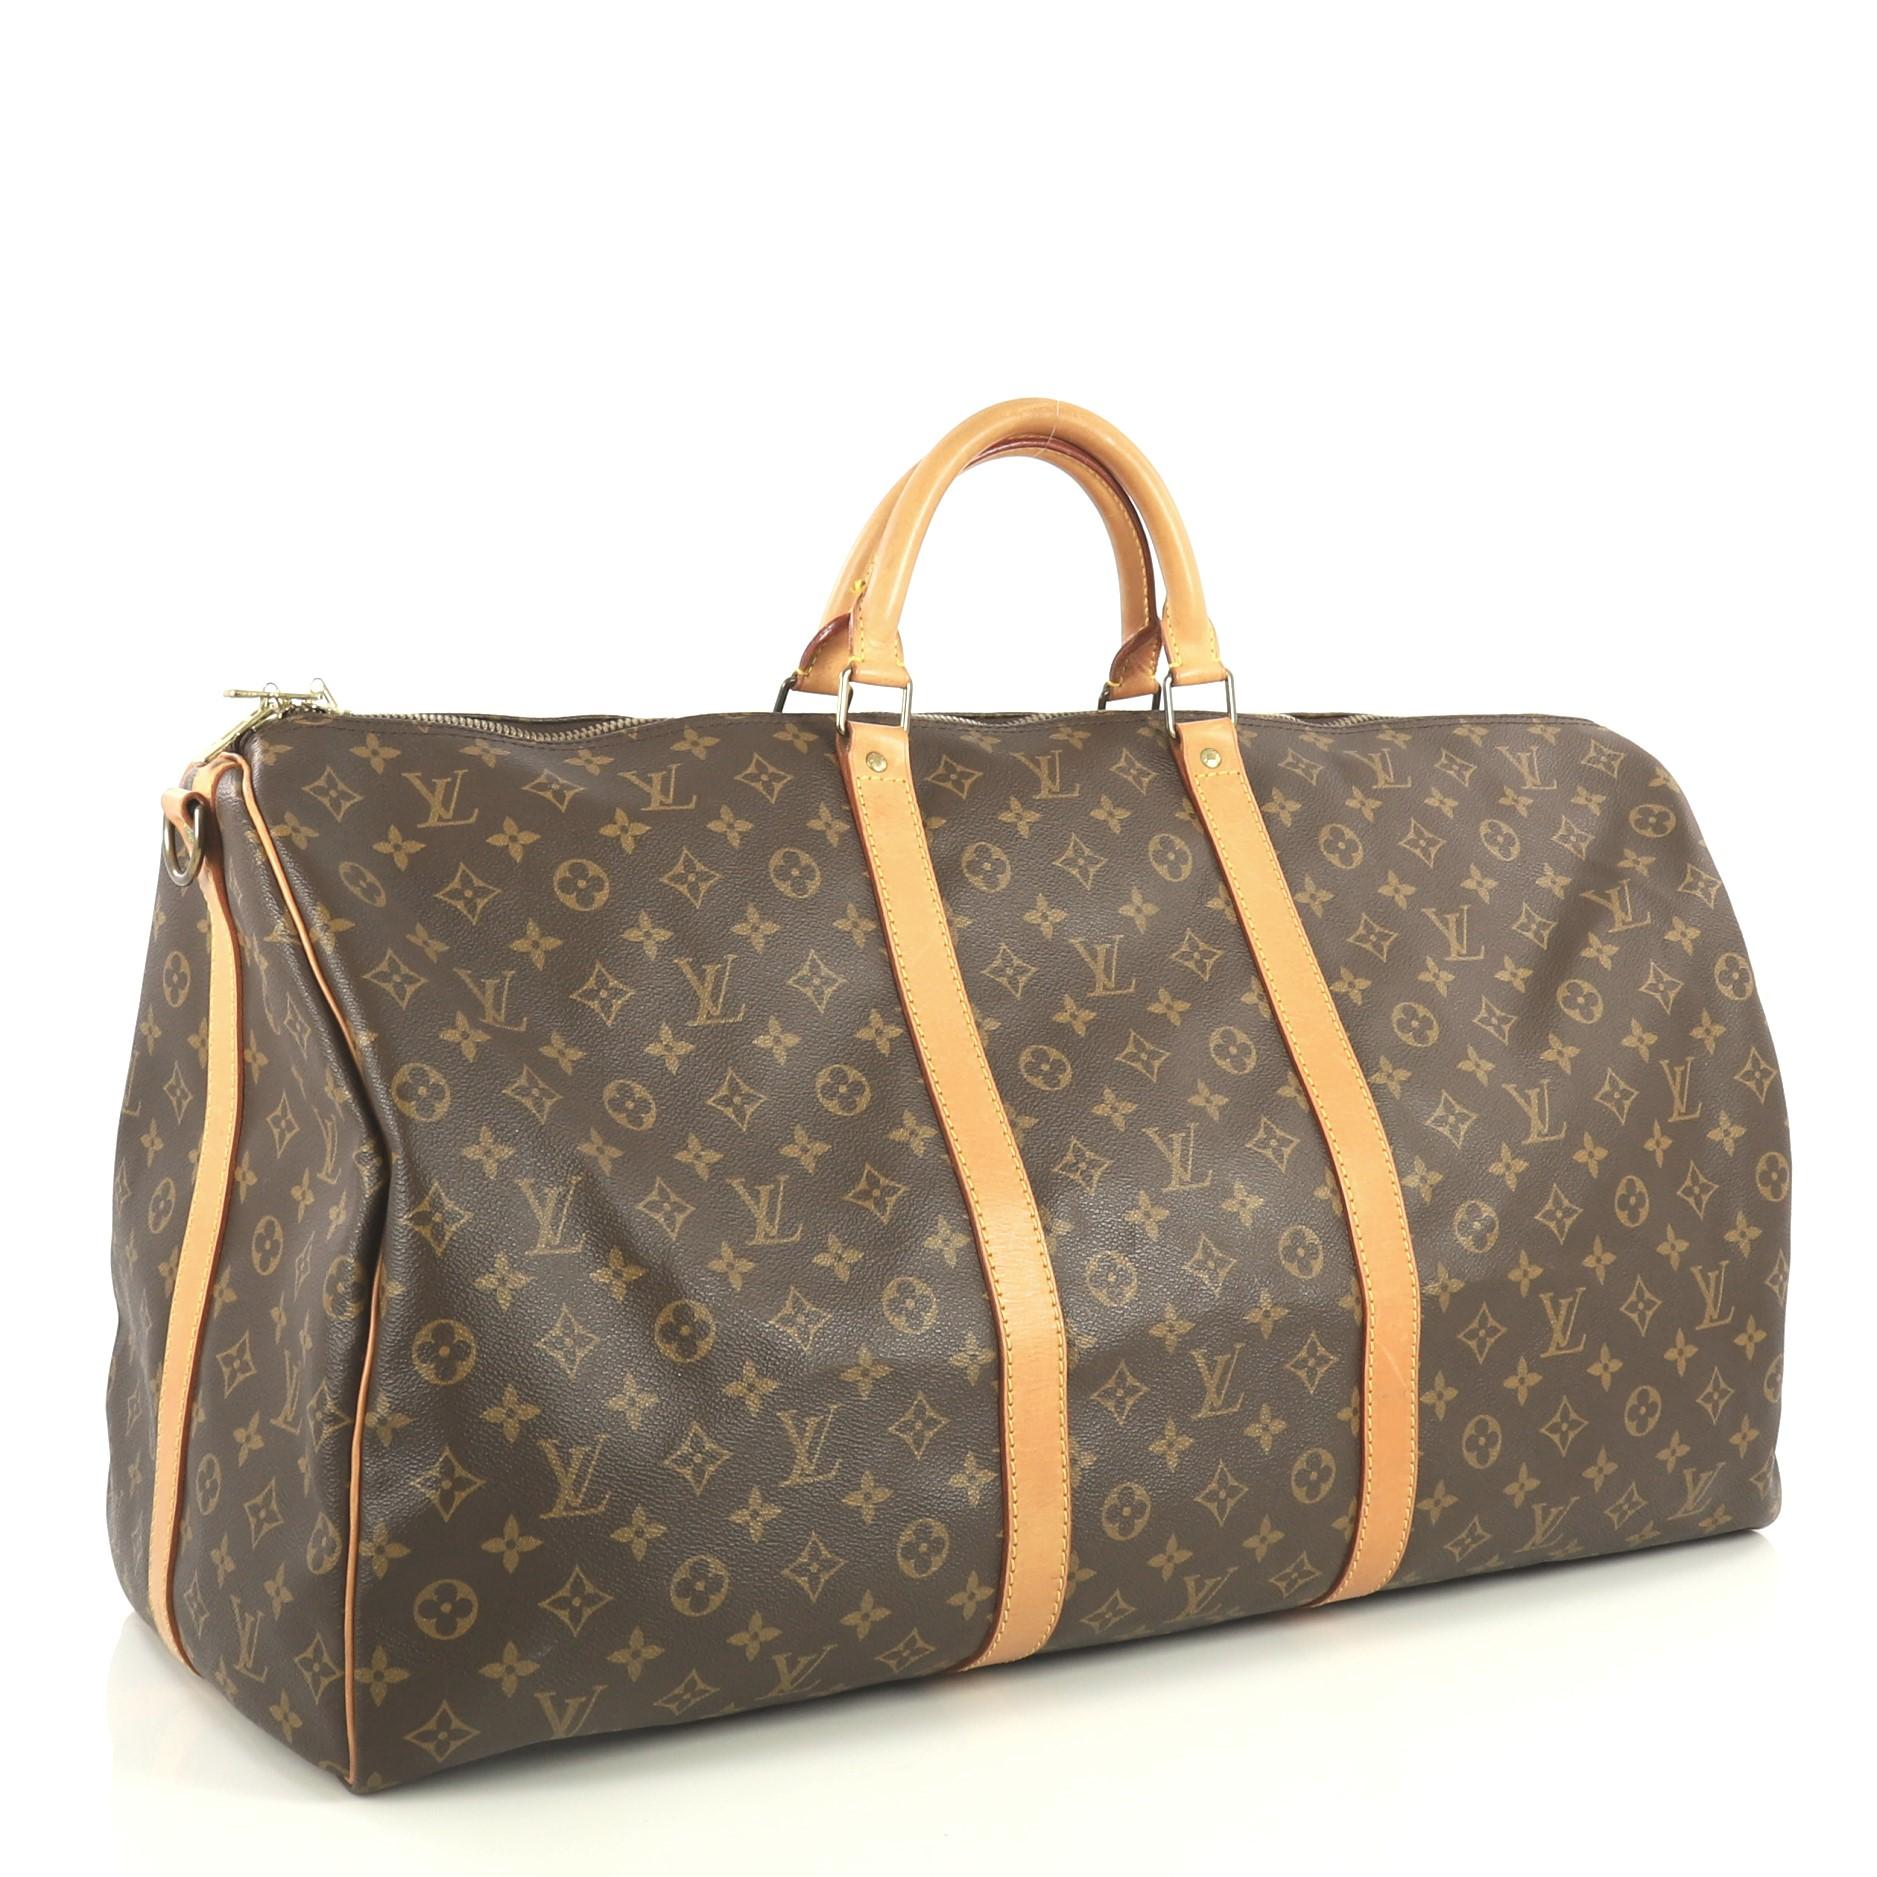 This Louis Vuitton Keepall Bandouliere Bag Monogram Canvas 60, crafted from brown monogram coated canvas, features dual rolled handles, cowhide leather trim, and gold-tone hardware. Its zip closure opens to a brown fabric interior. Authenticity code